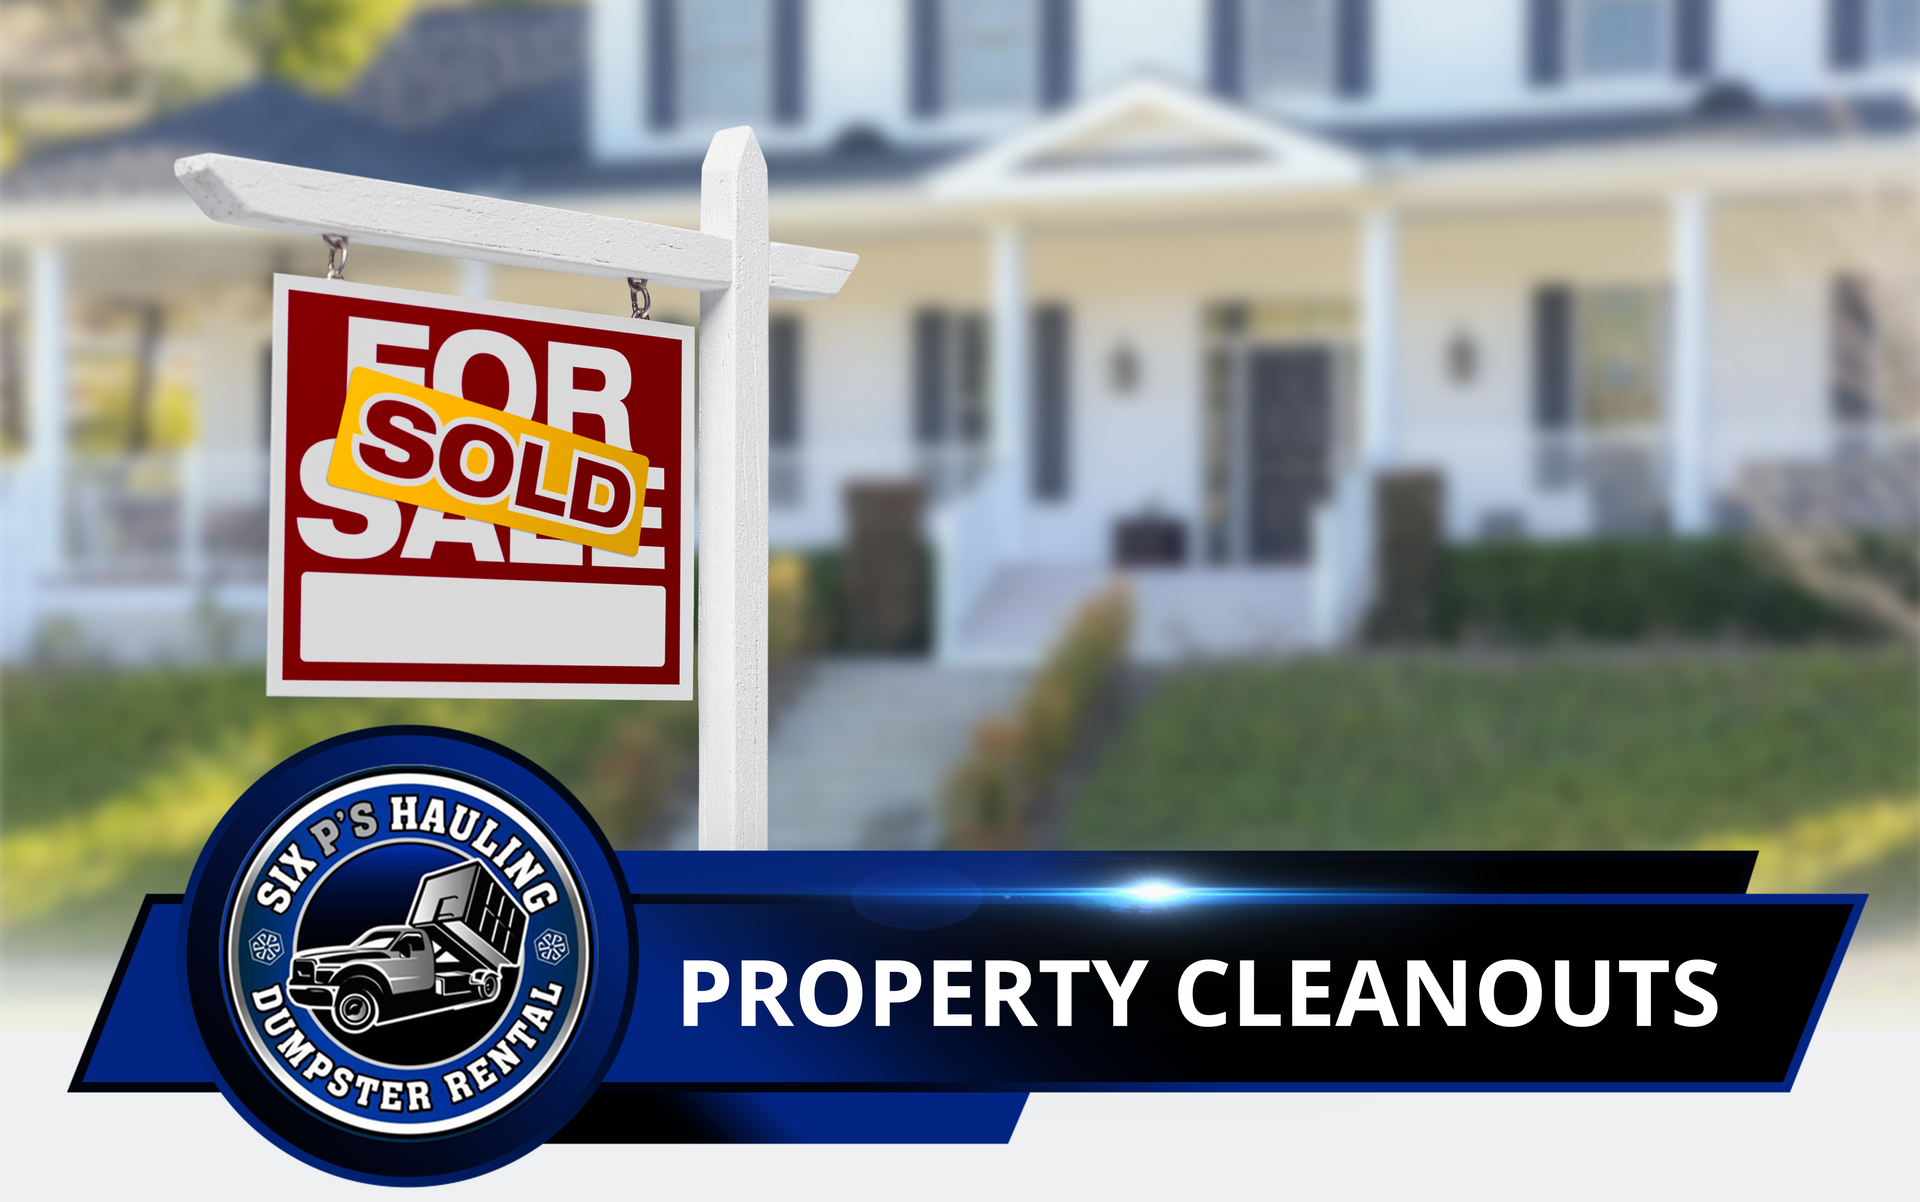 Property Cleanouts in Pomona, CA